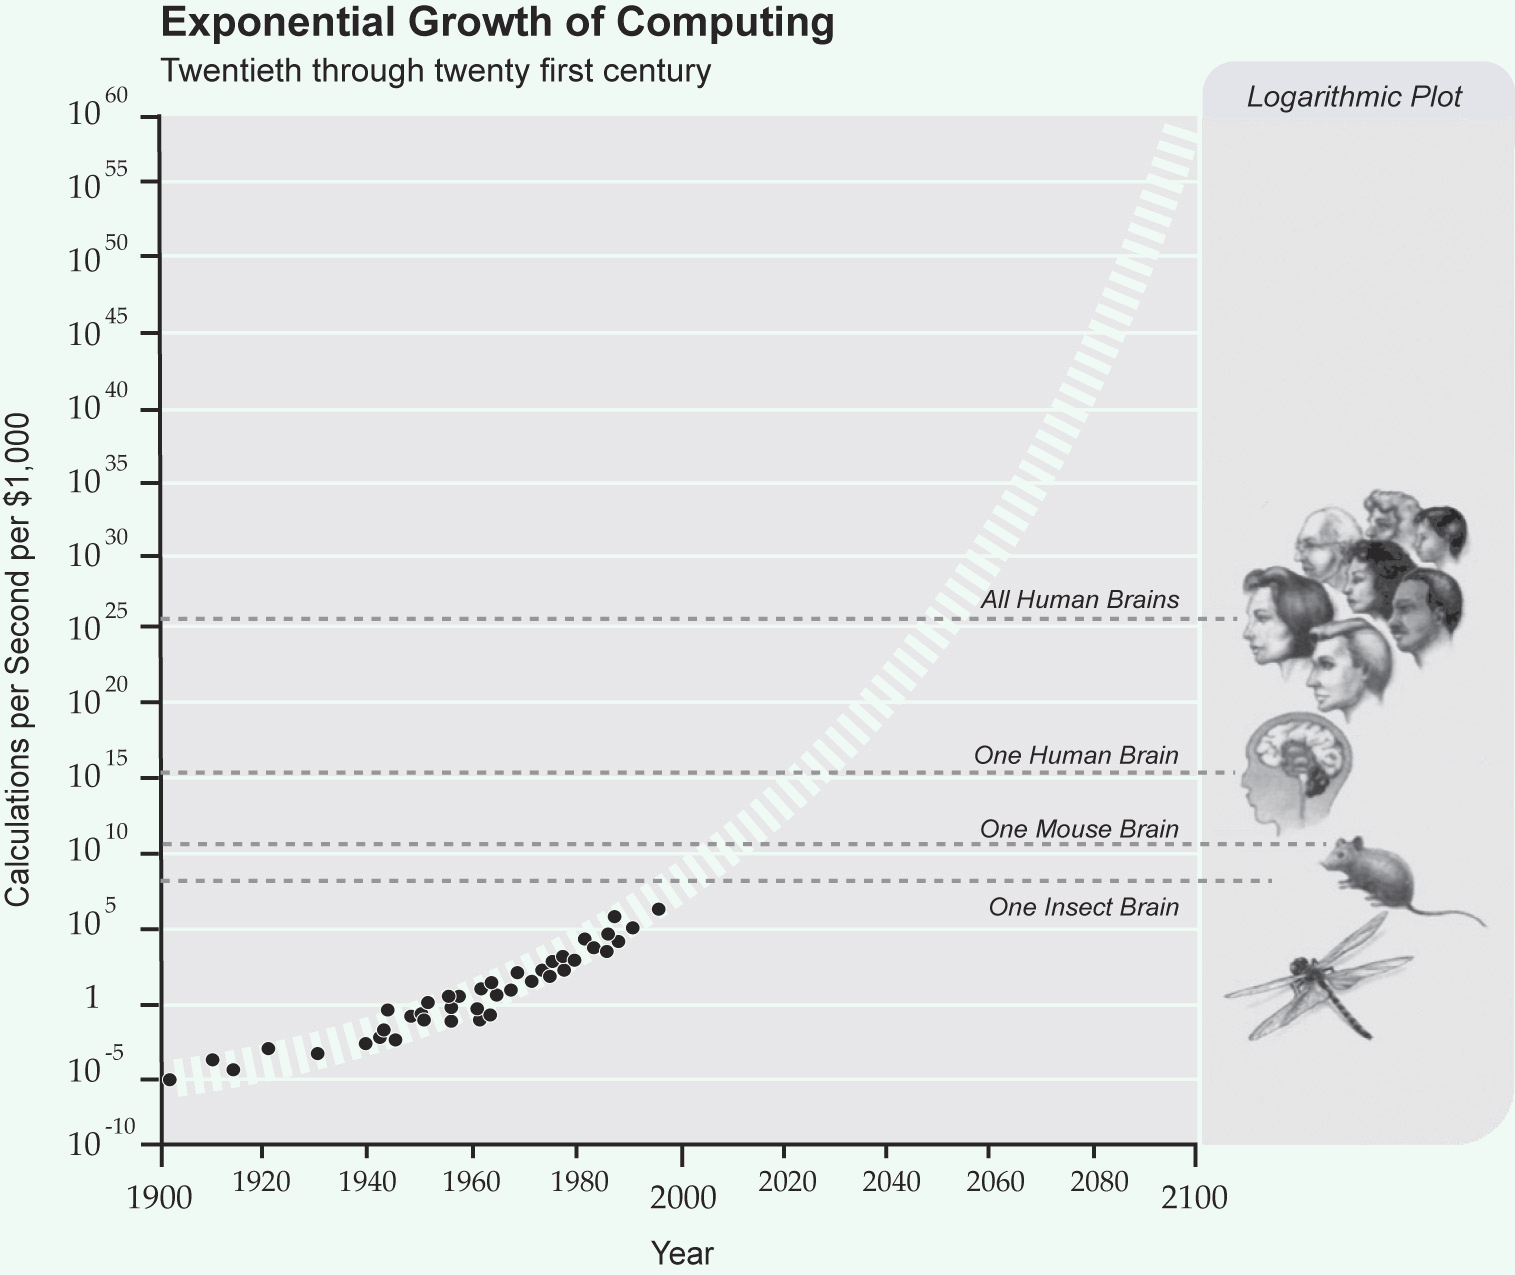 Exponential Growth of Computing visual chart